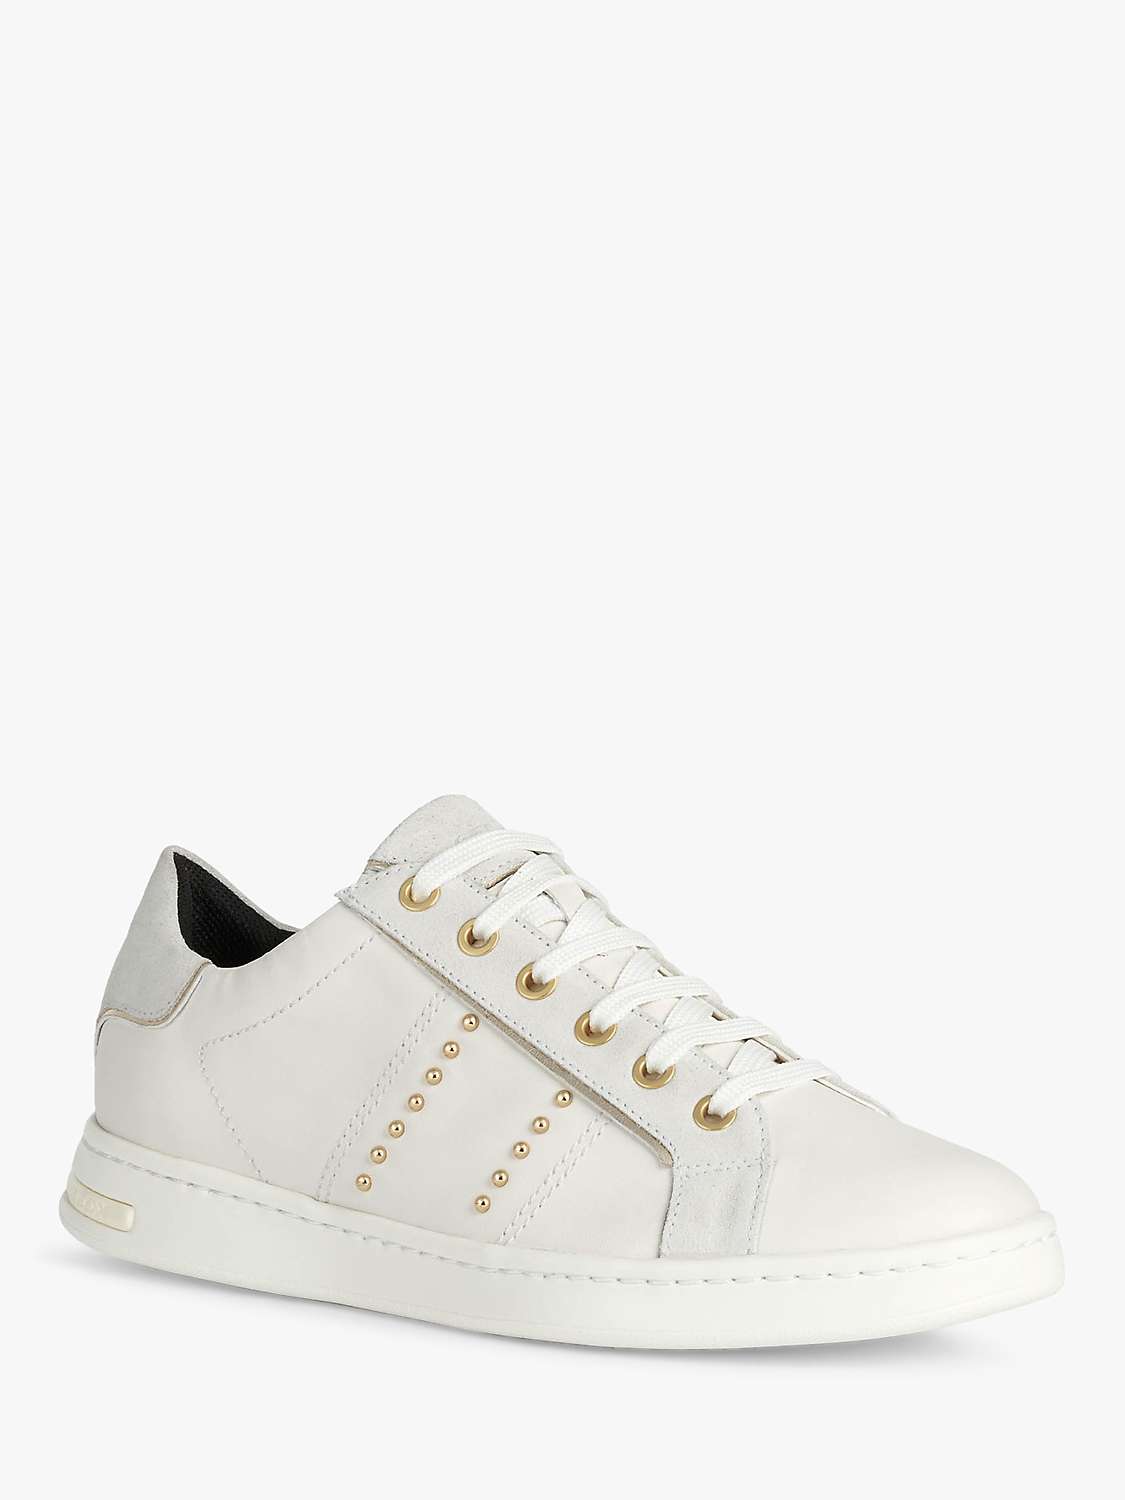 Buy Geox Women's Jaysen Leather Stud Lace Up Trainers, Off White Online at johnlewis.com